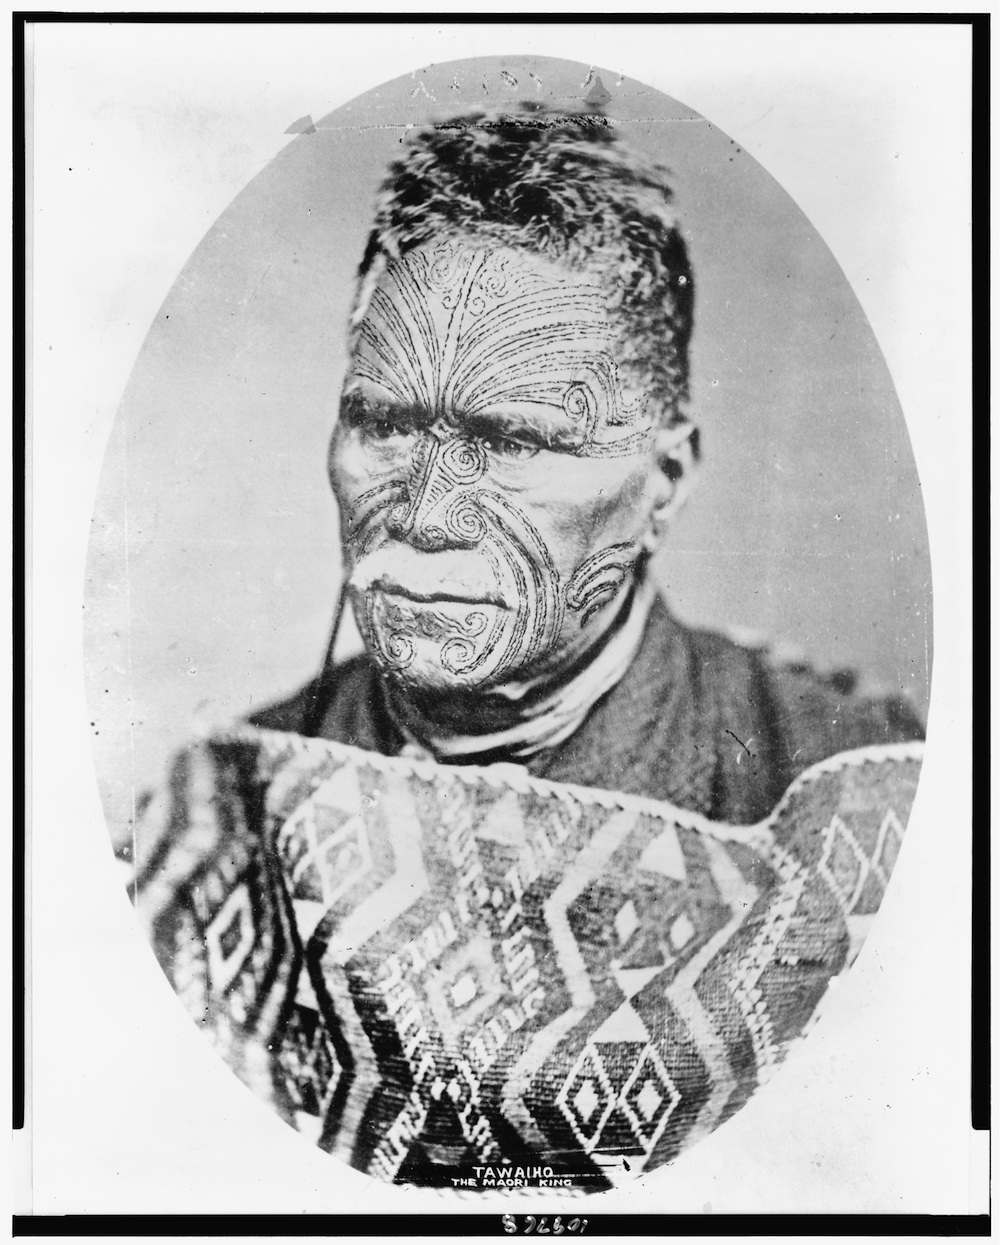 Tawaiho, the Maori king of New Zealand, head-and-shoulders portrait, facing slightly left.